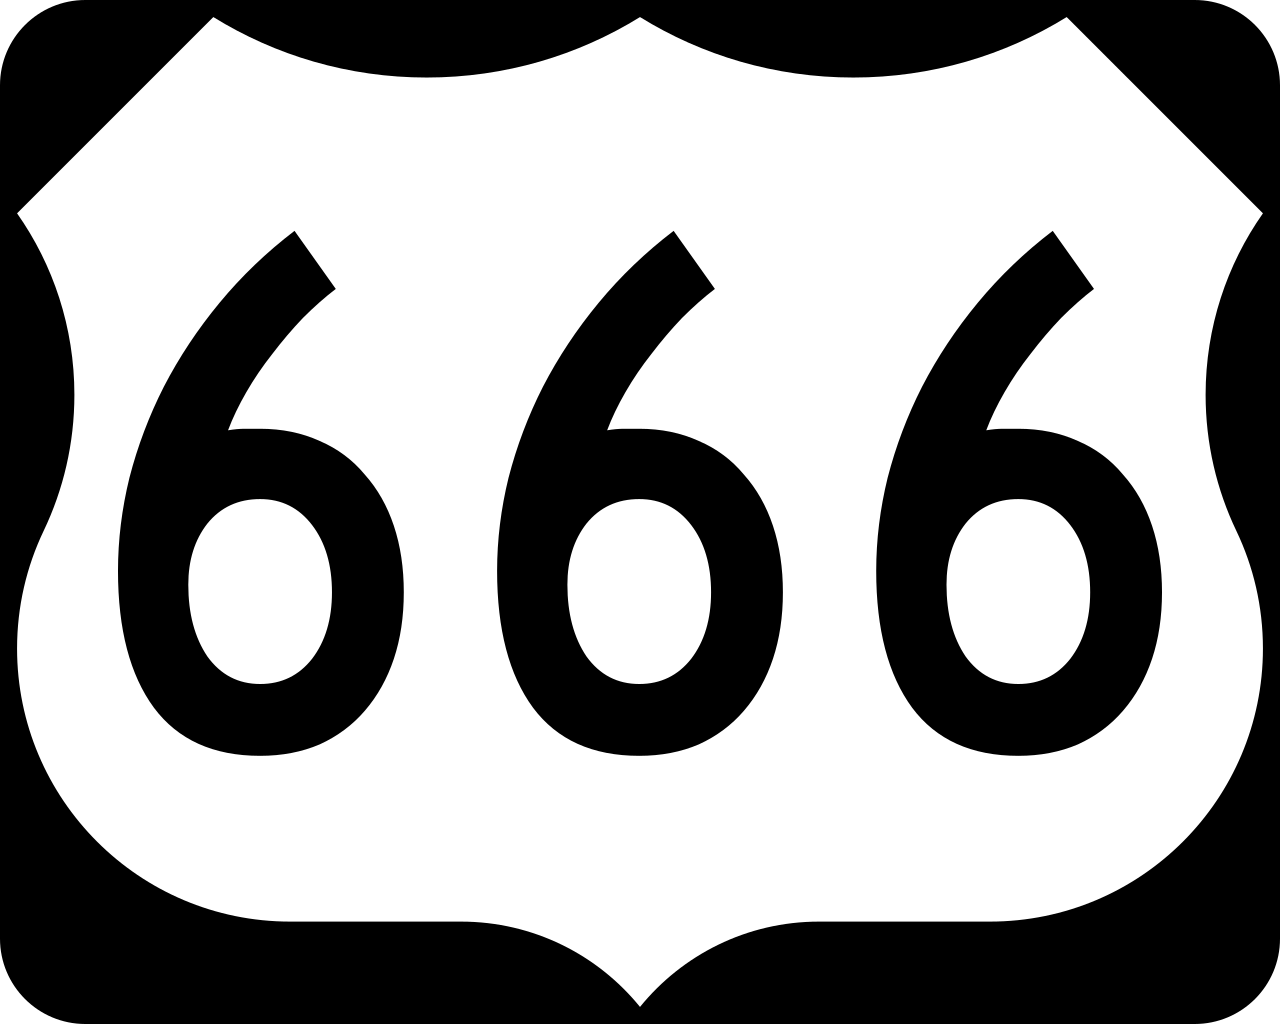 1280px-US_666.svg.png